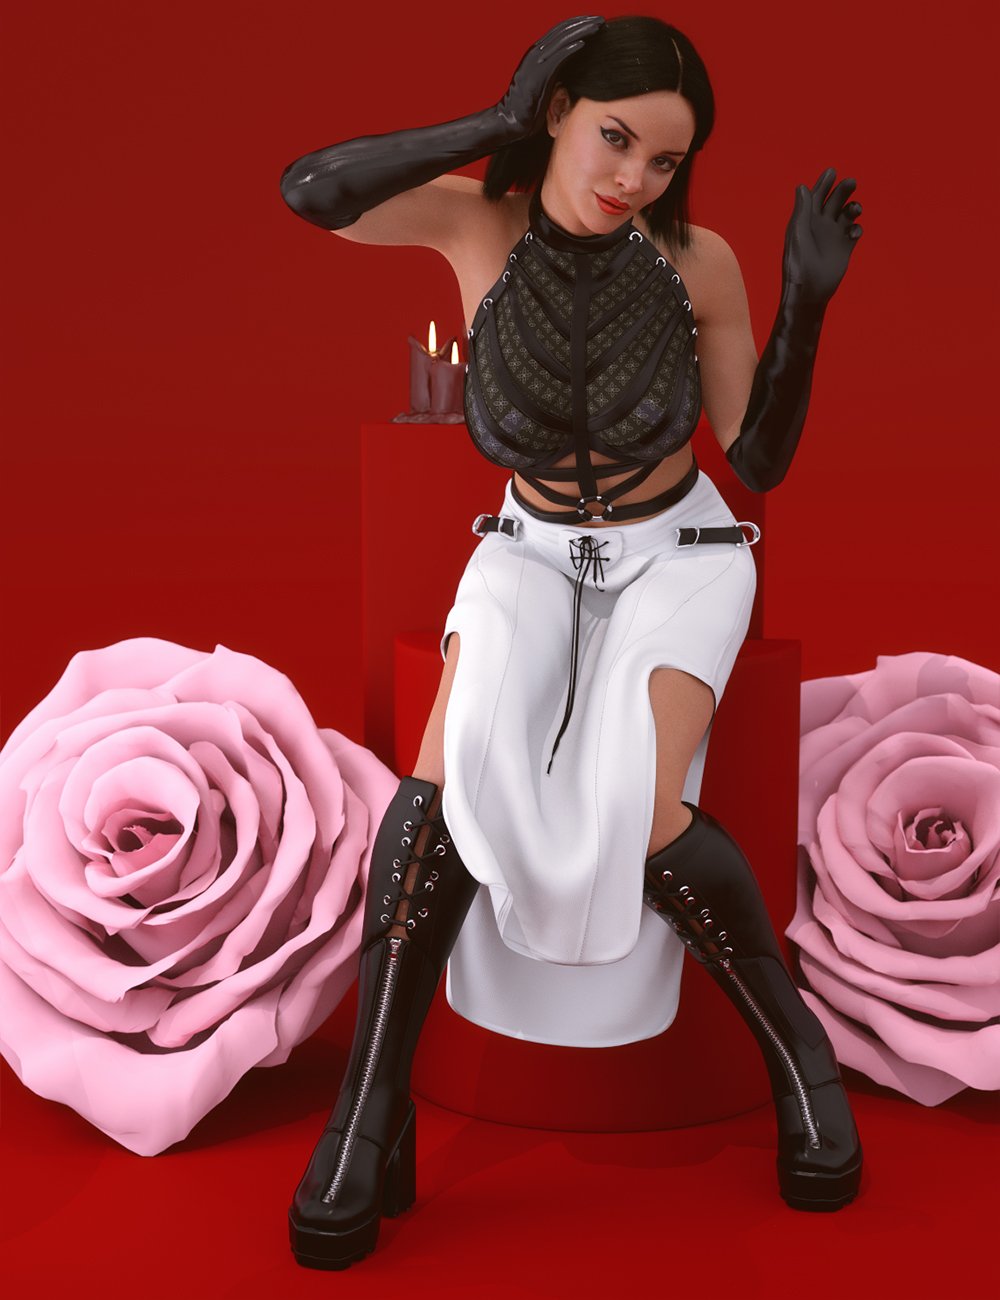 Gothic Style Outfit V2 dForce Skirt for Genesis 8 and 8.1 Females